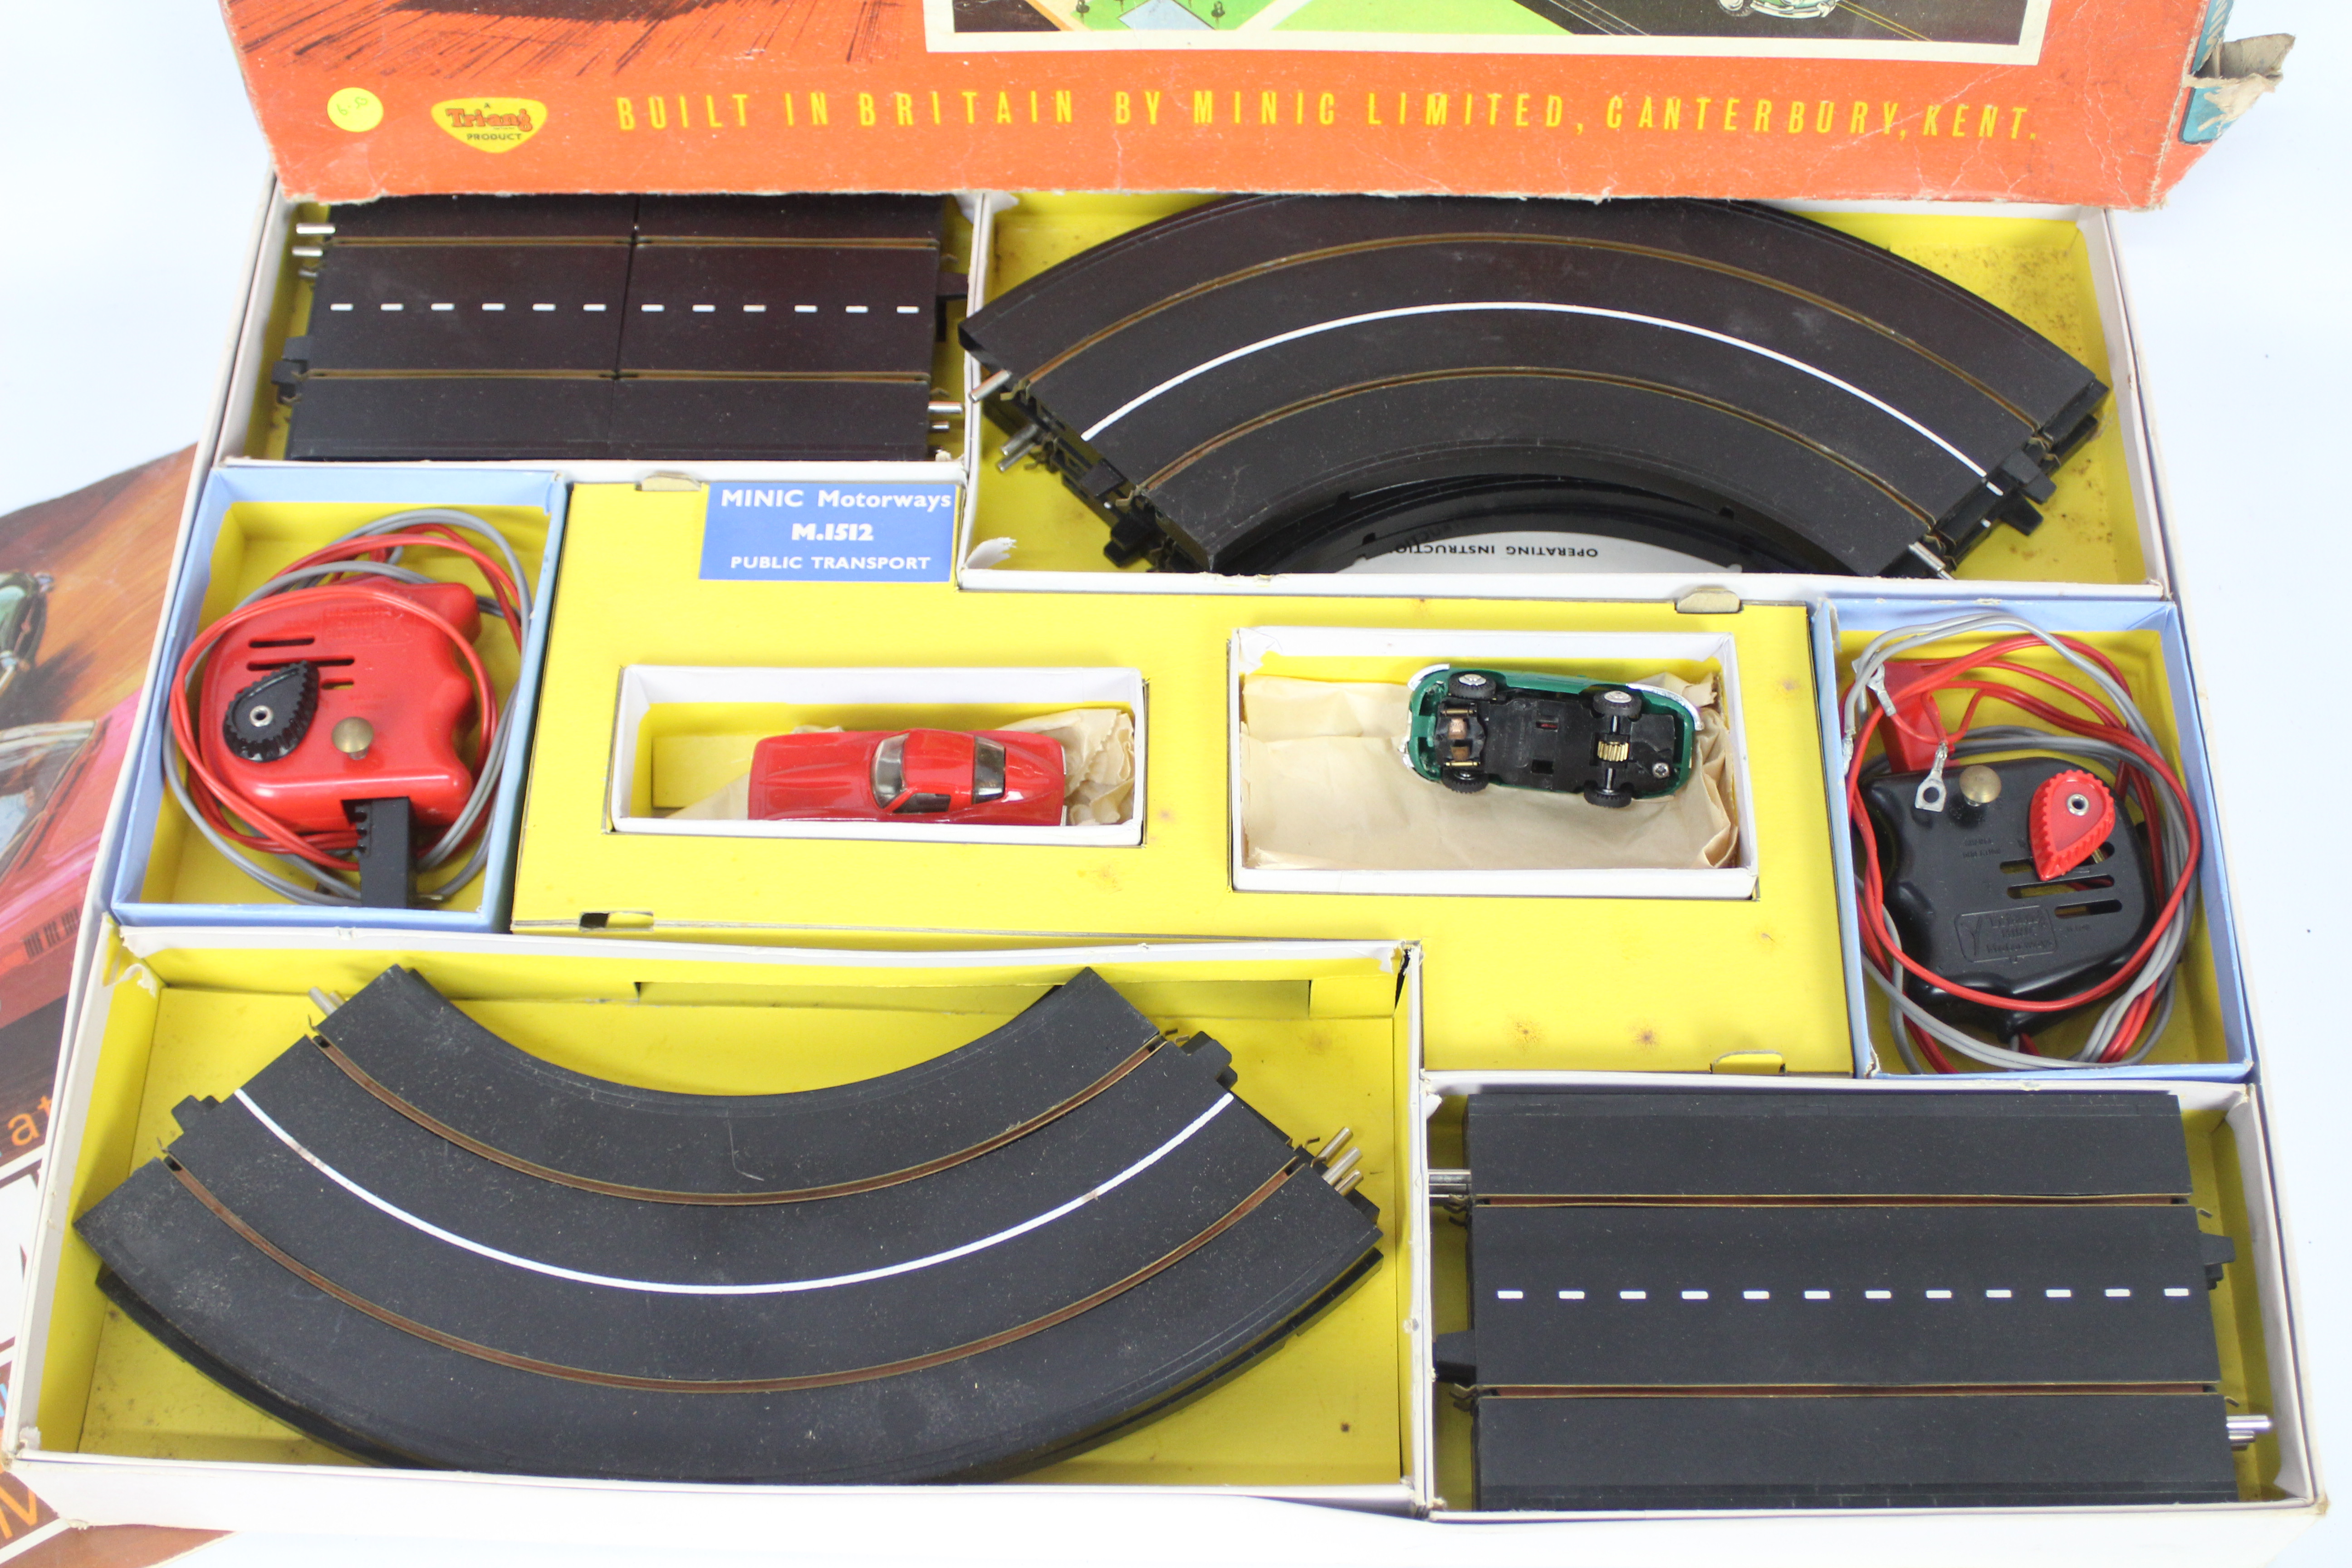 Triang - Minic Motorways - A boxed M.1522 Racing set. - Image 3 of 3